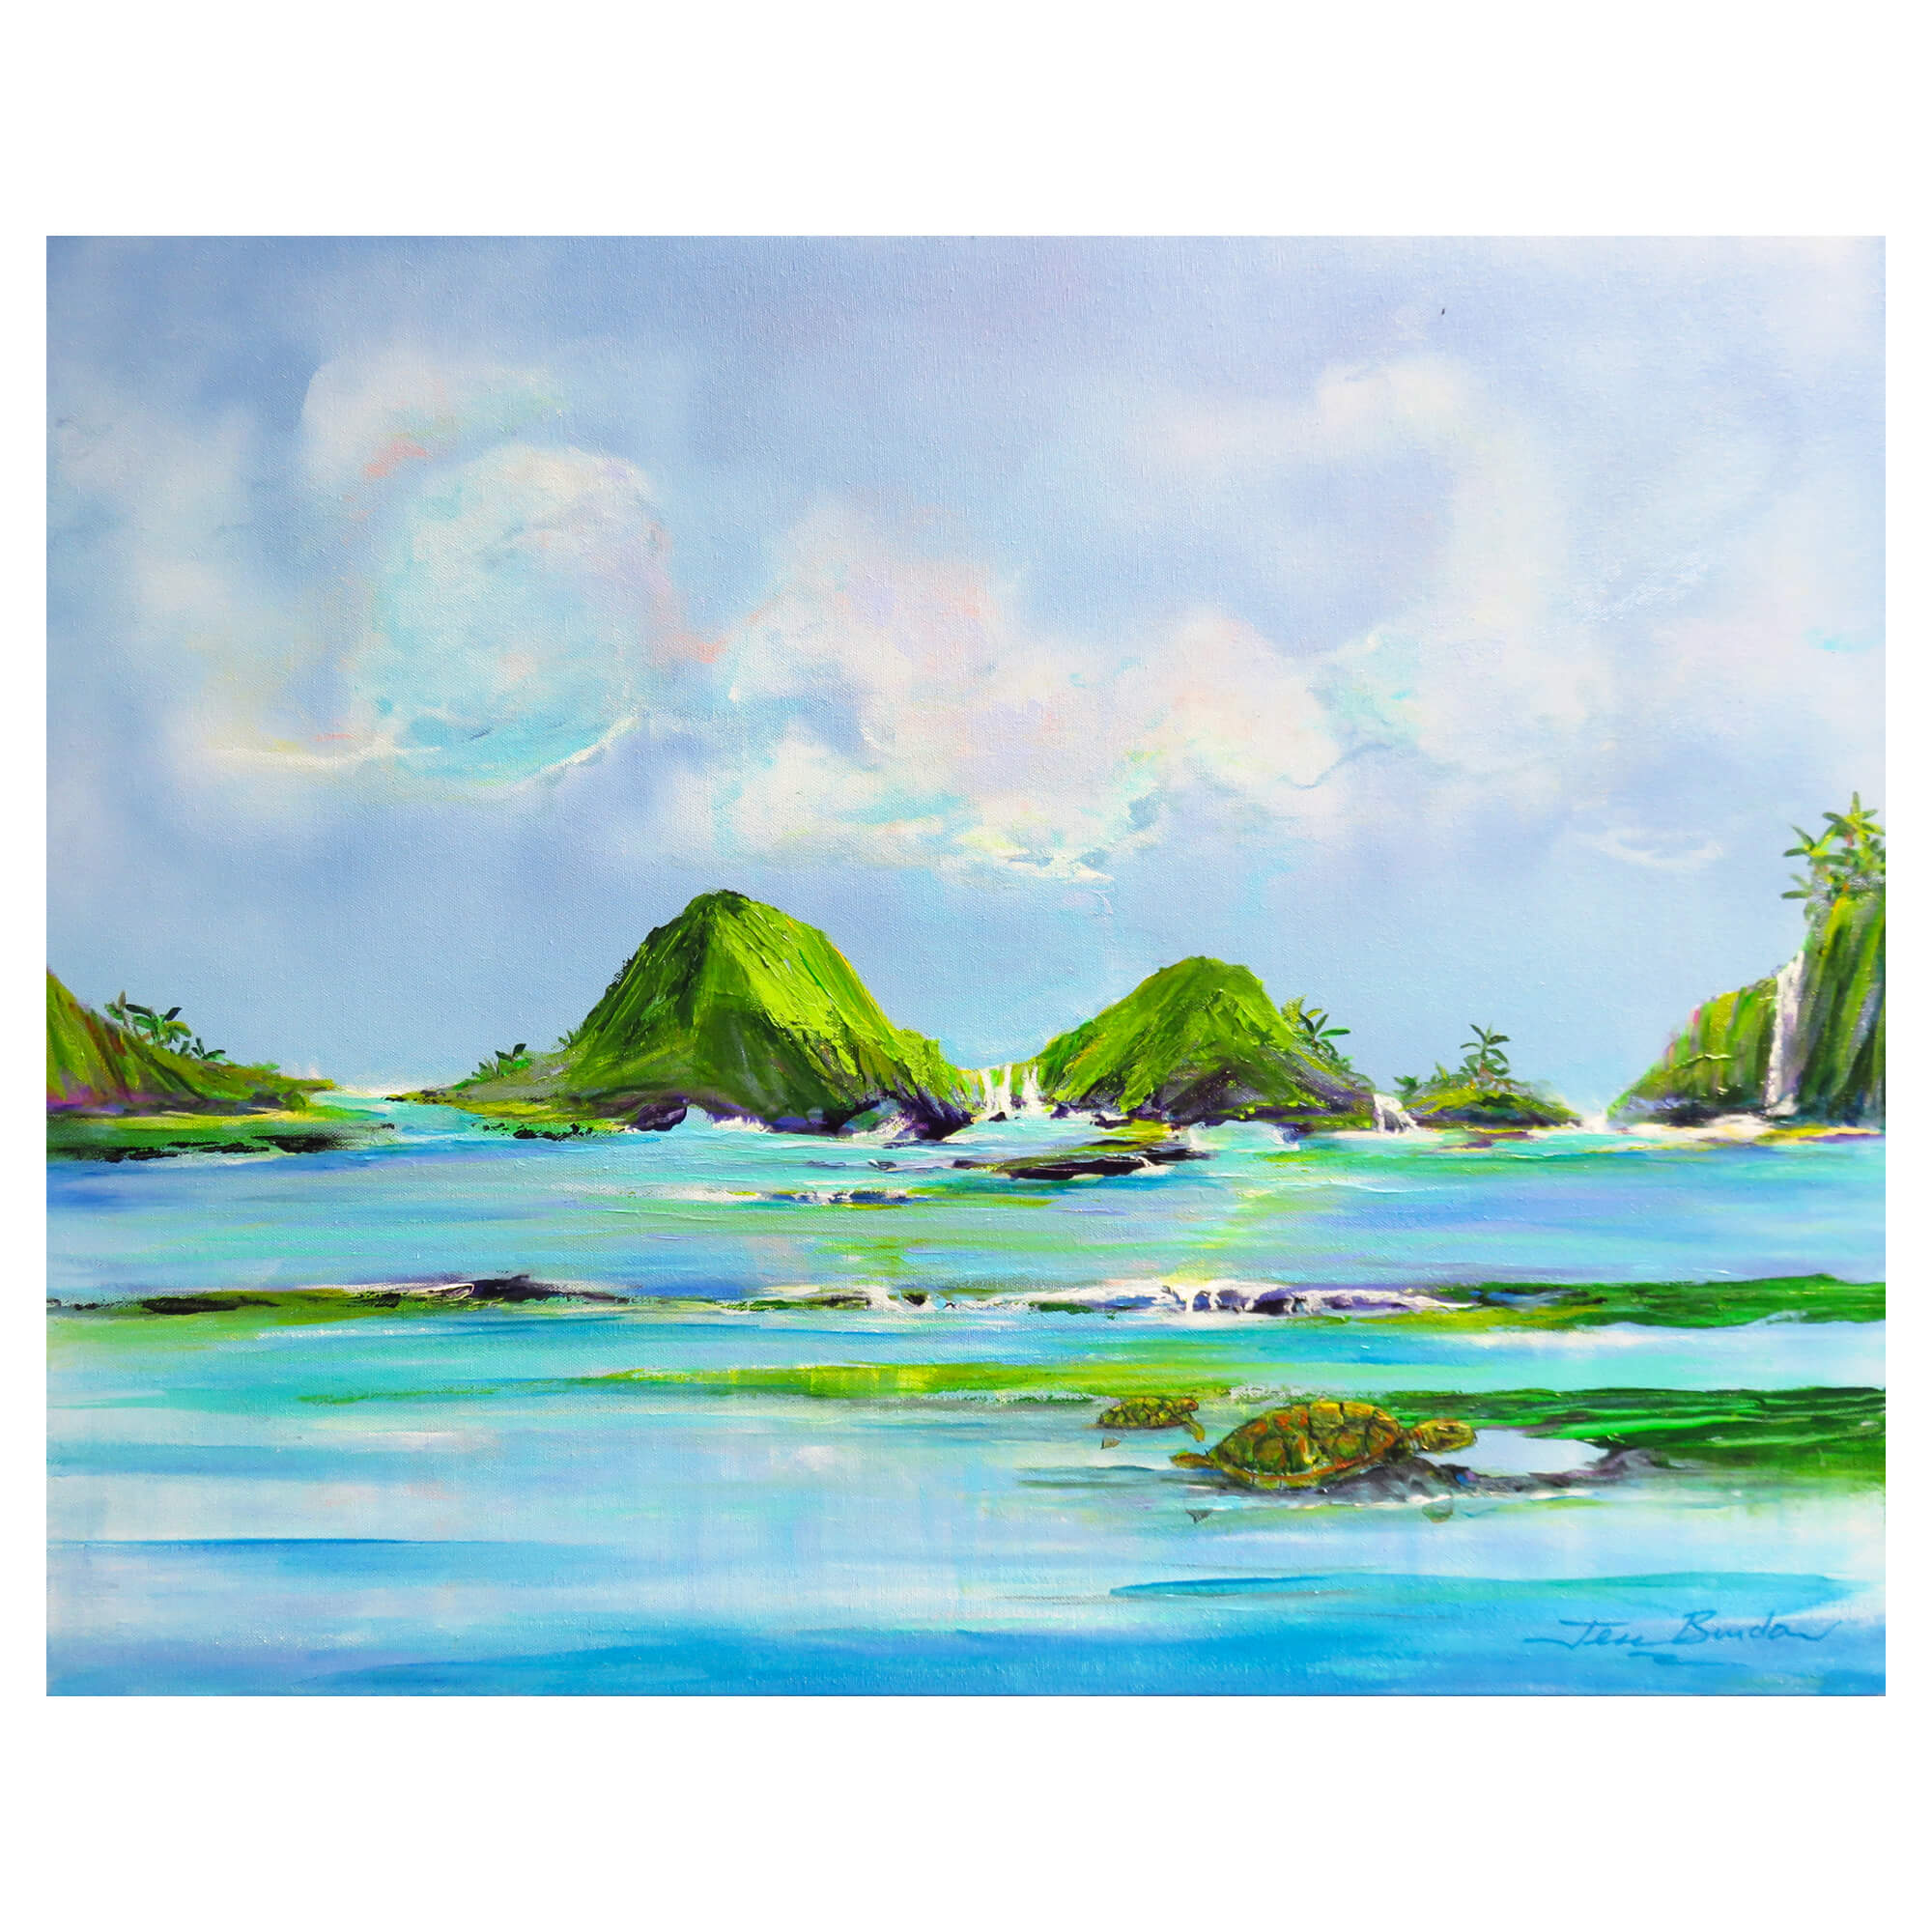 A tranquil seascape with sea turtles and flowing water by Hawaii artist Jess Burda